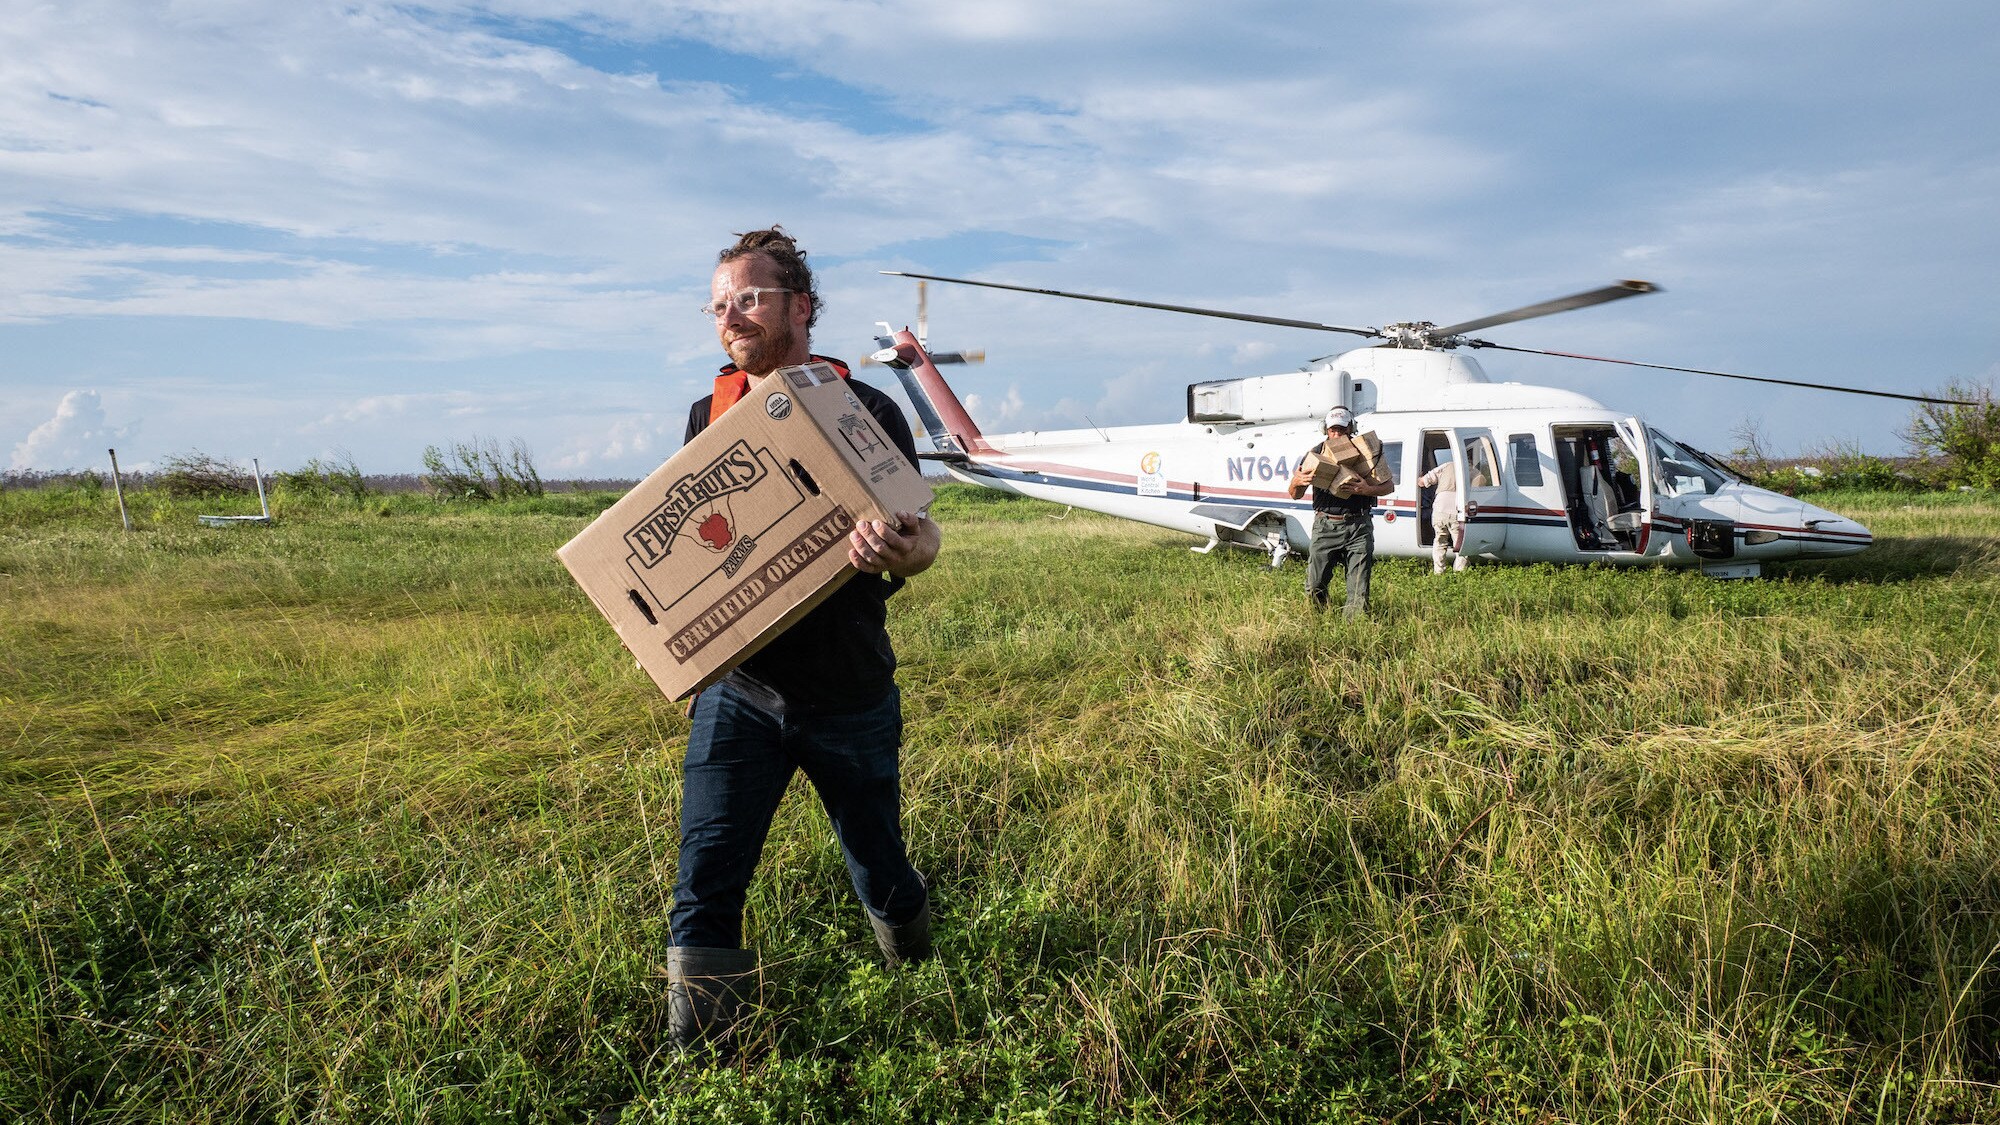 Sam Bloch, WCK's Director of Emergency Response, carries a box in field from helicopter. (Credit: National Geographic/Sebastian Lindstrom)